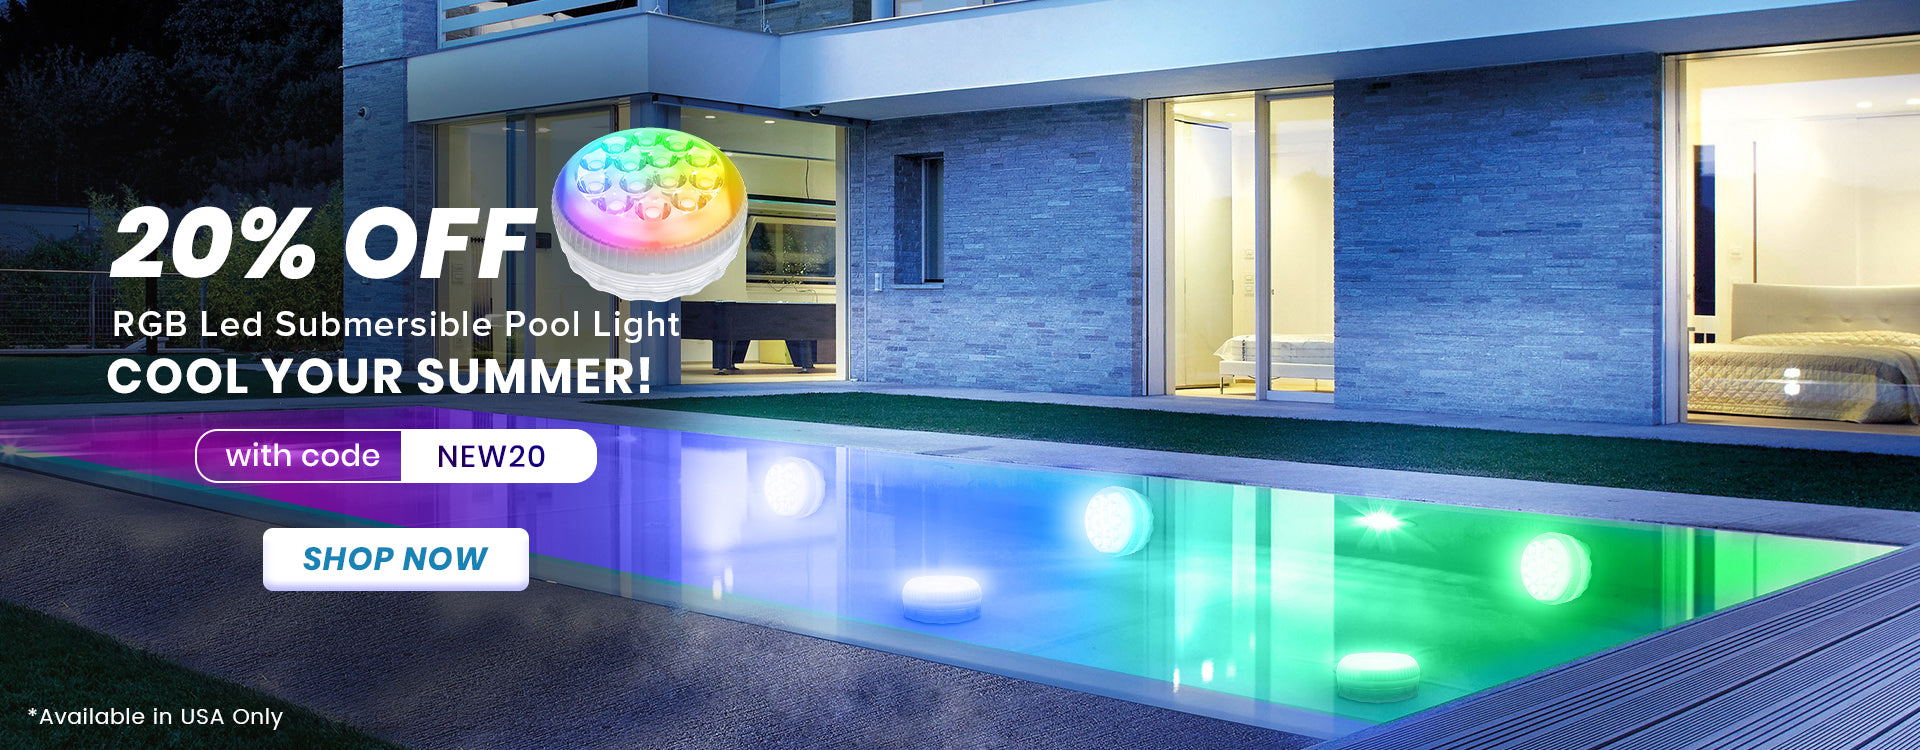 Use code "NEW20" to get 20% off for RGB Led Submersible Pool Light,Cool your summer!